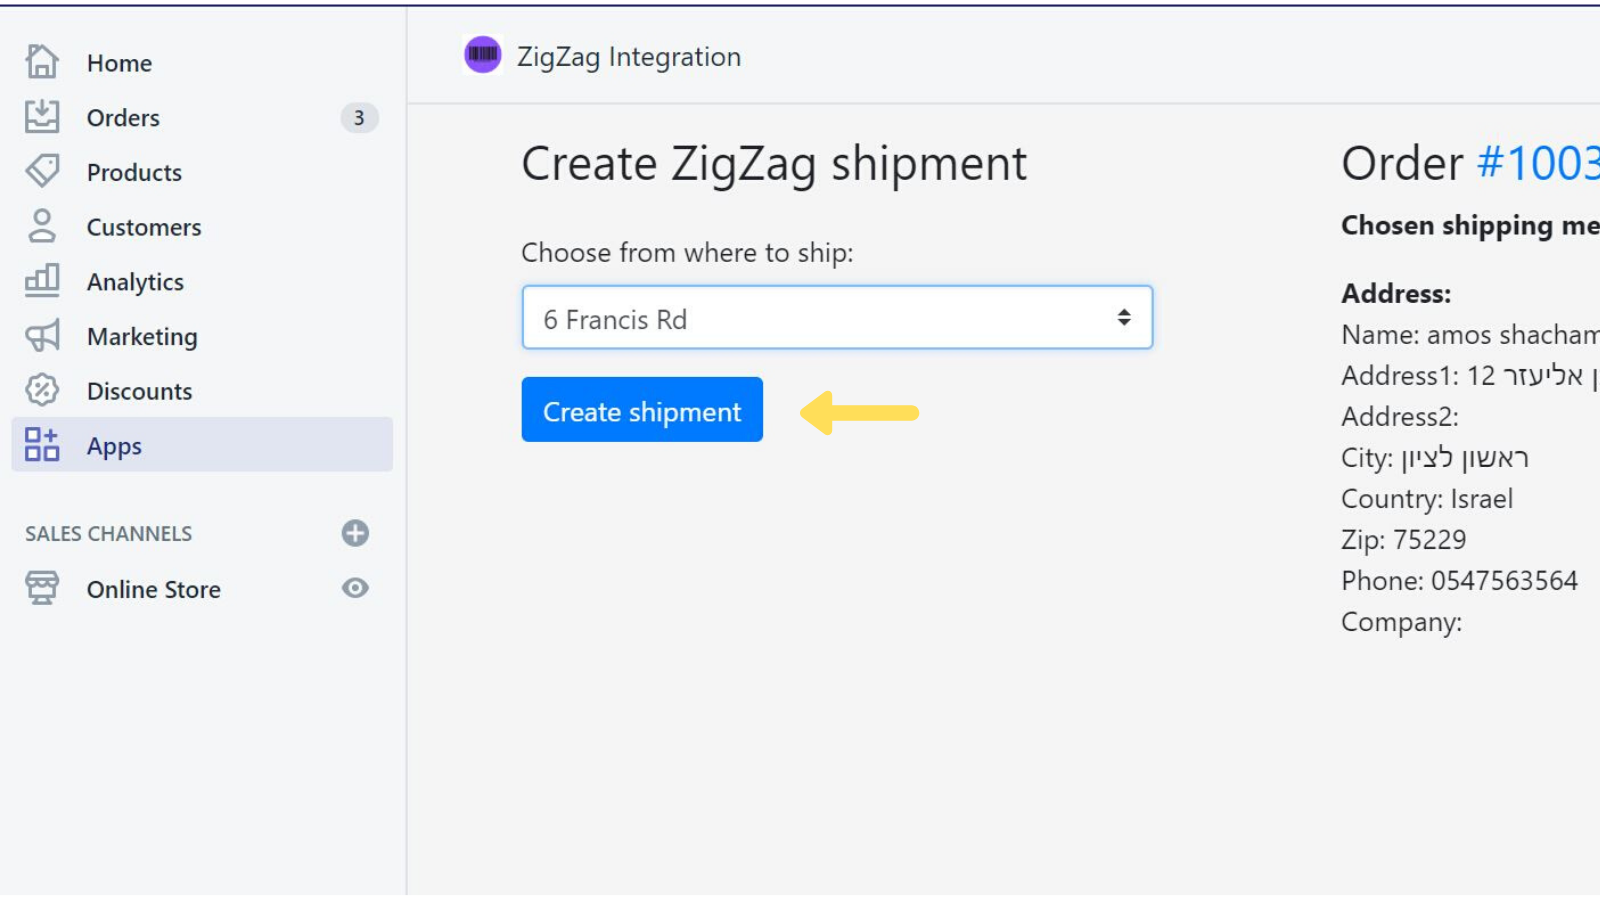 Send a new shipment to ZigZag systems